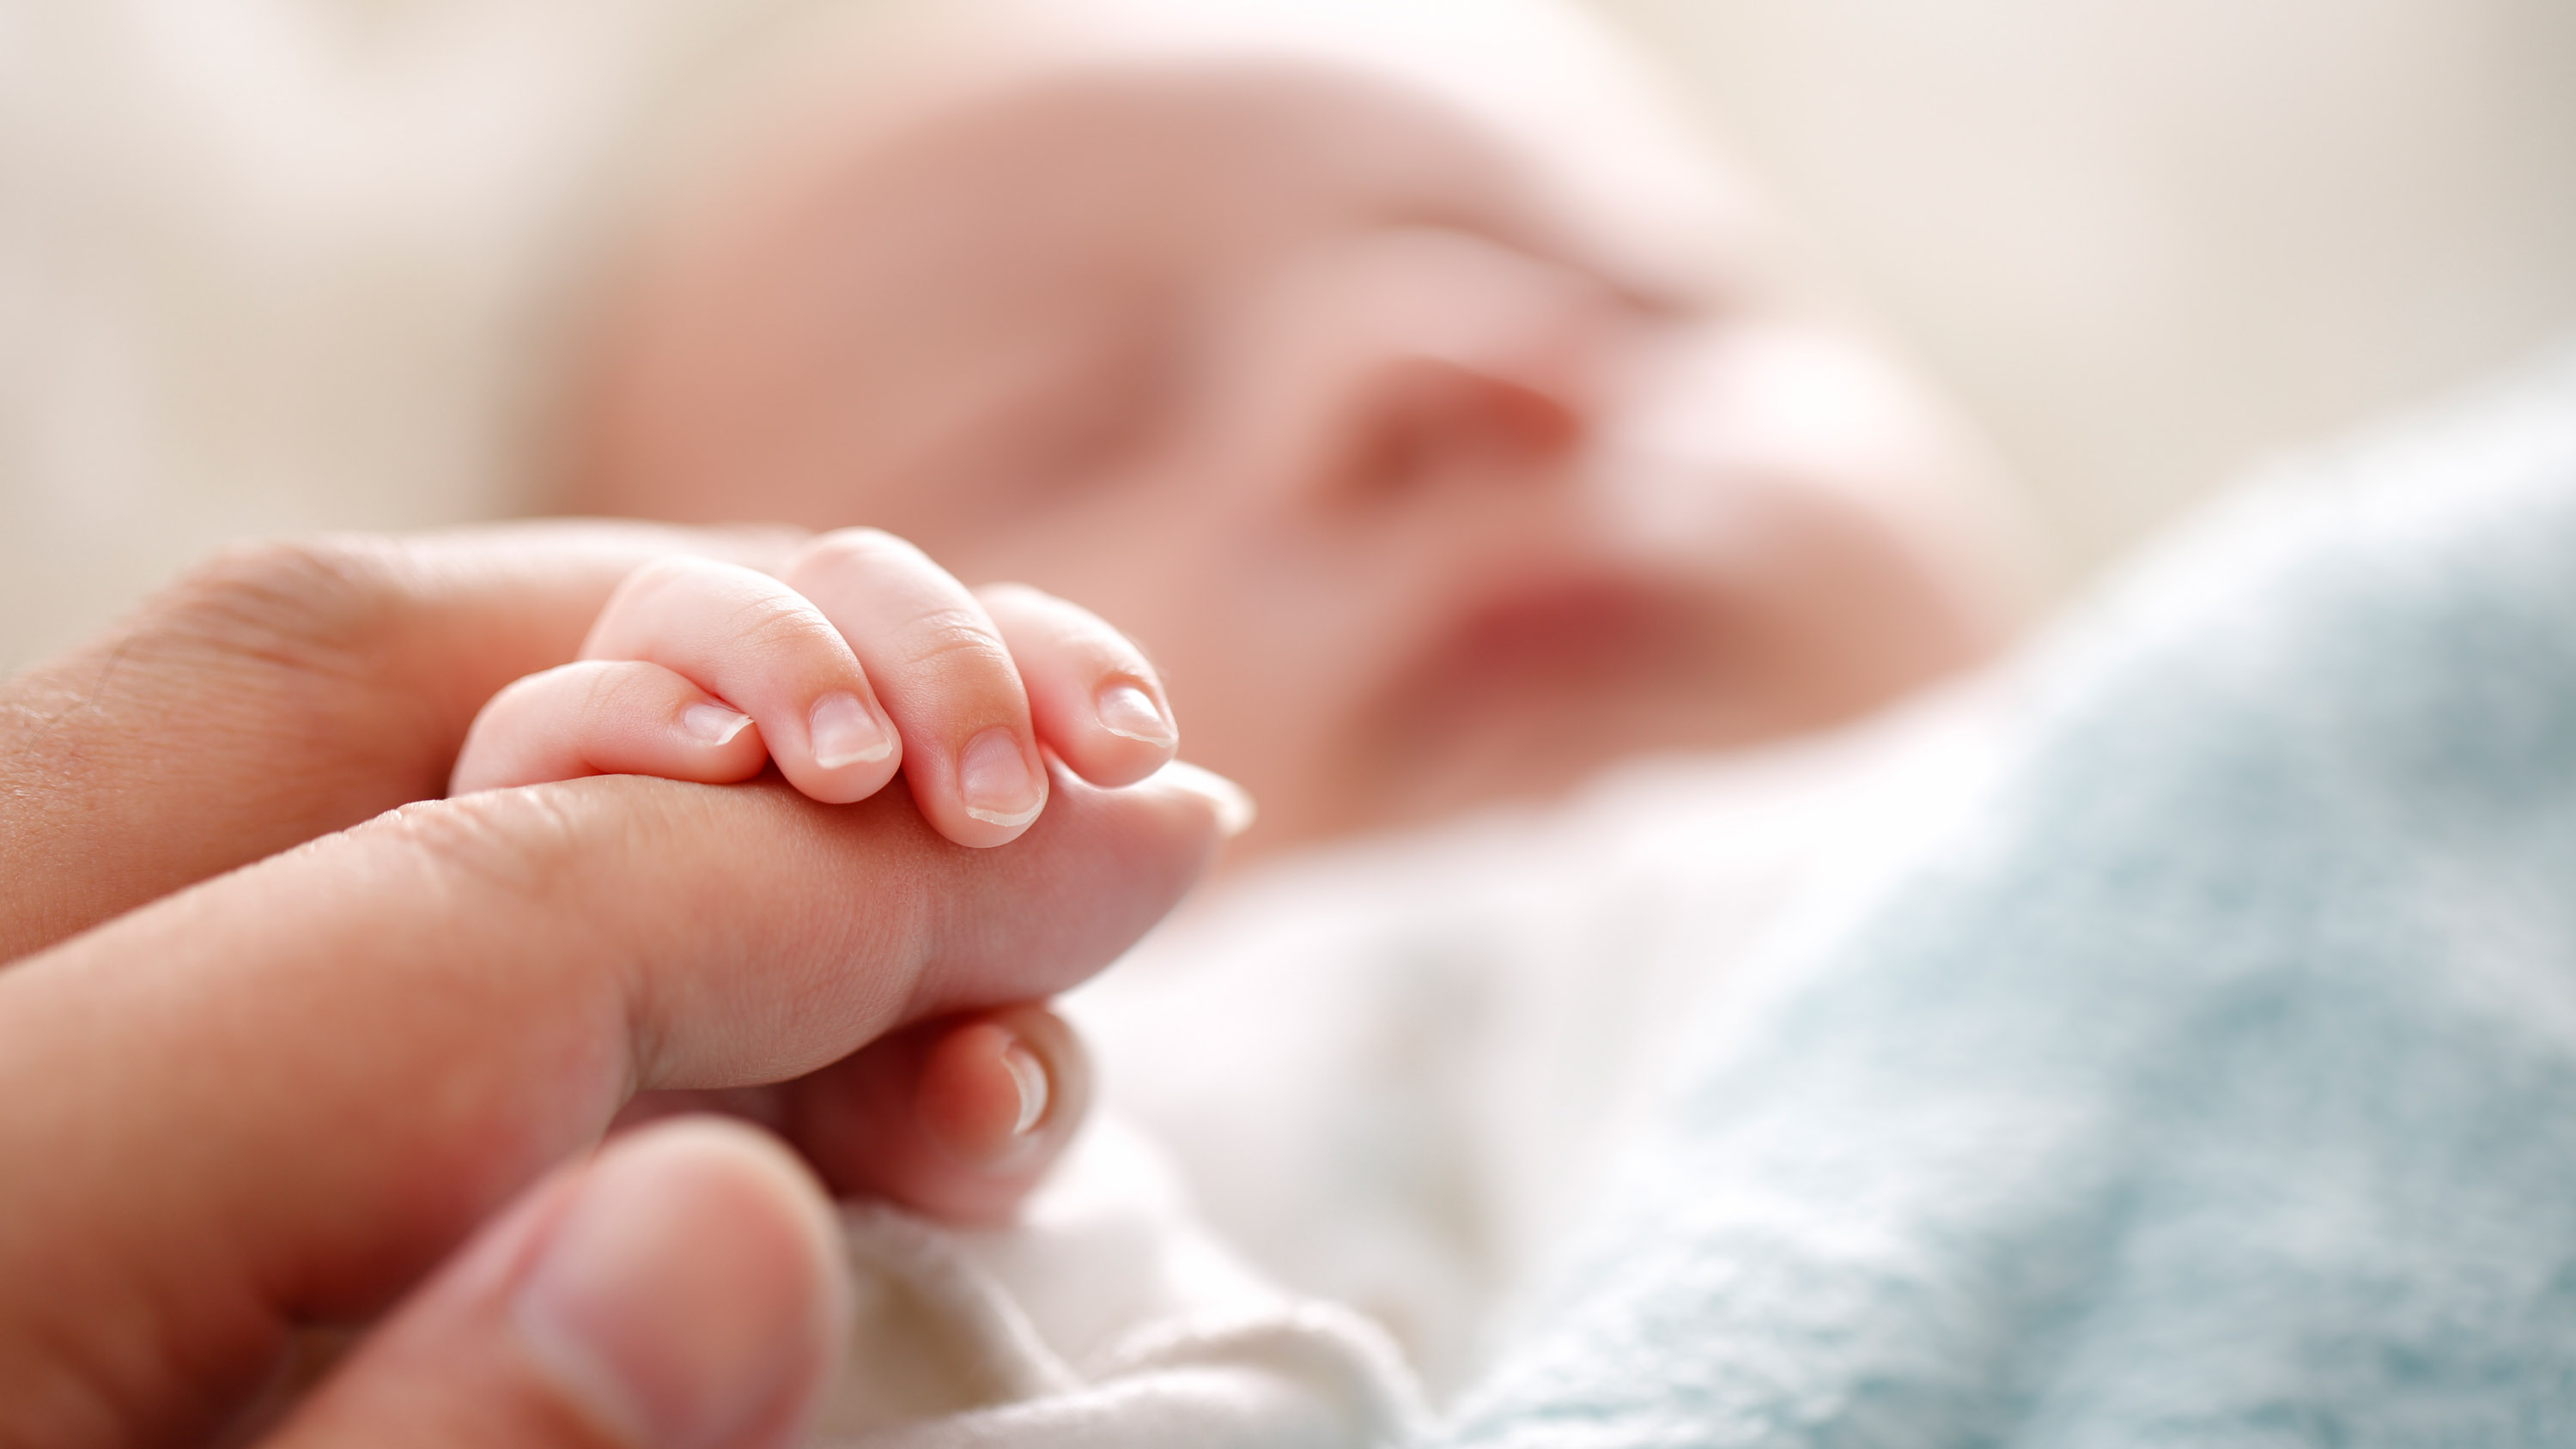 close-up of a baby&#039;s hand holding an adult finger, with the baby&#039;s face in soft focus in the background